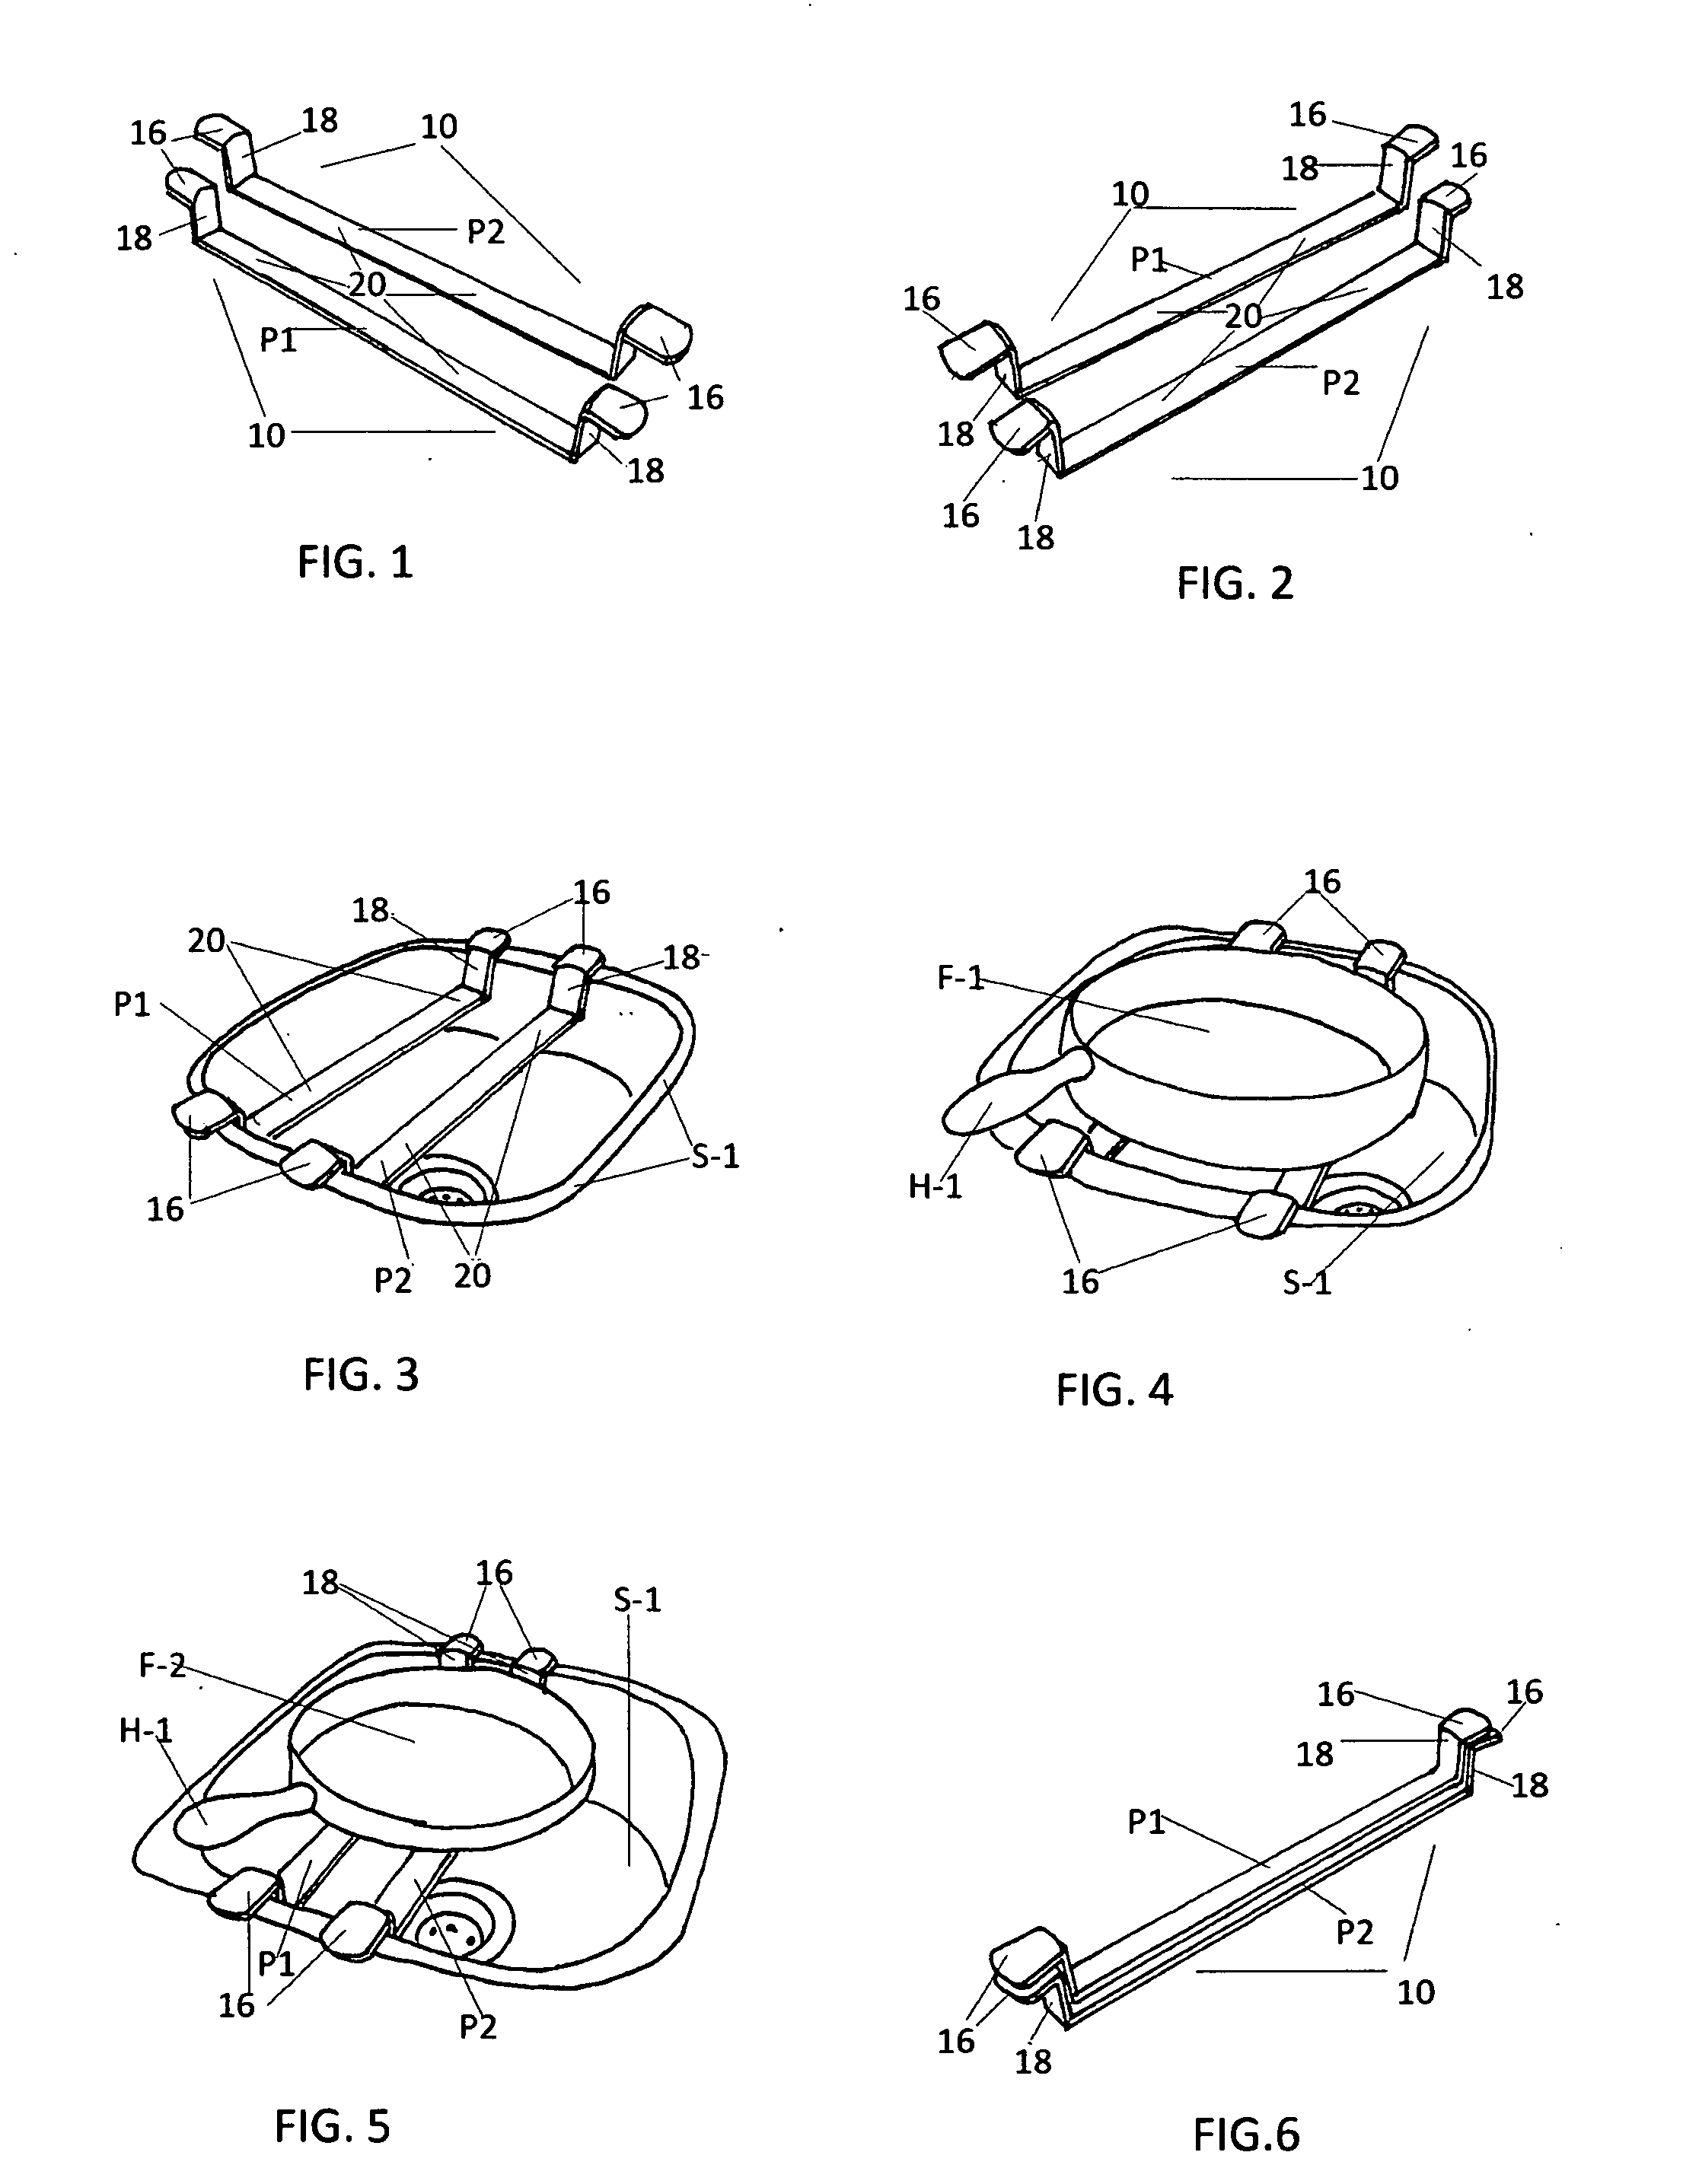 Sink rack and system for supporting large frying pans horizontally within the confines of a kitchen sink